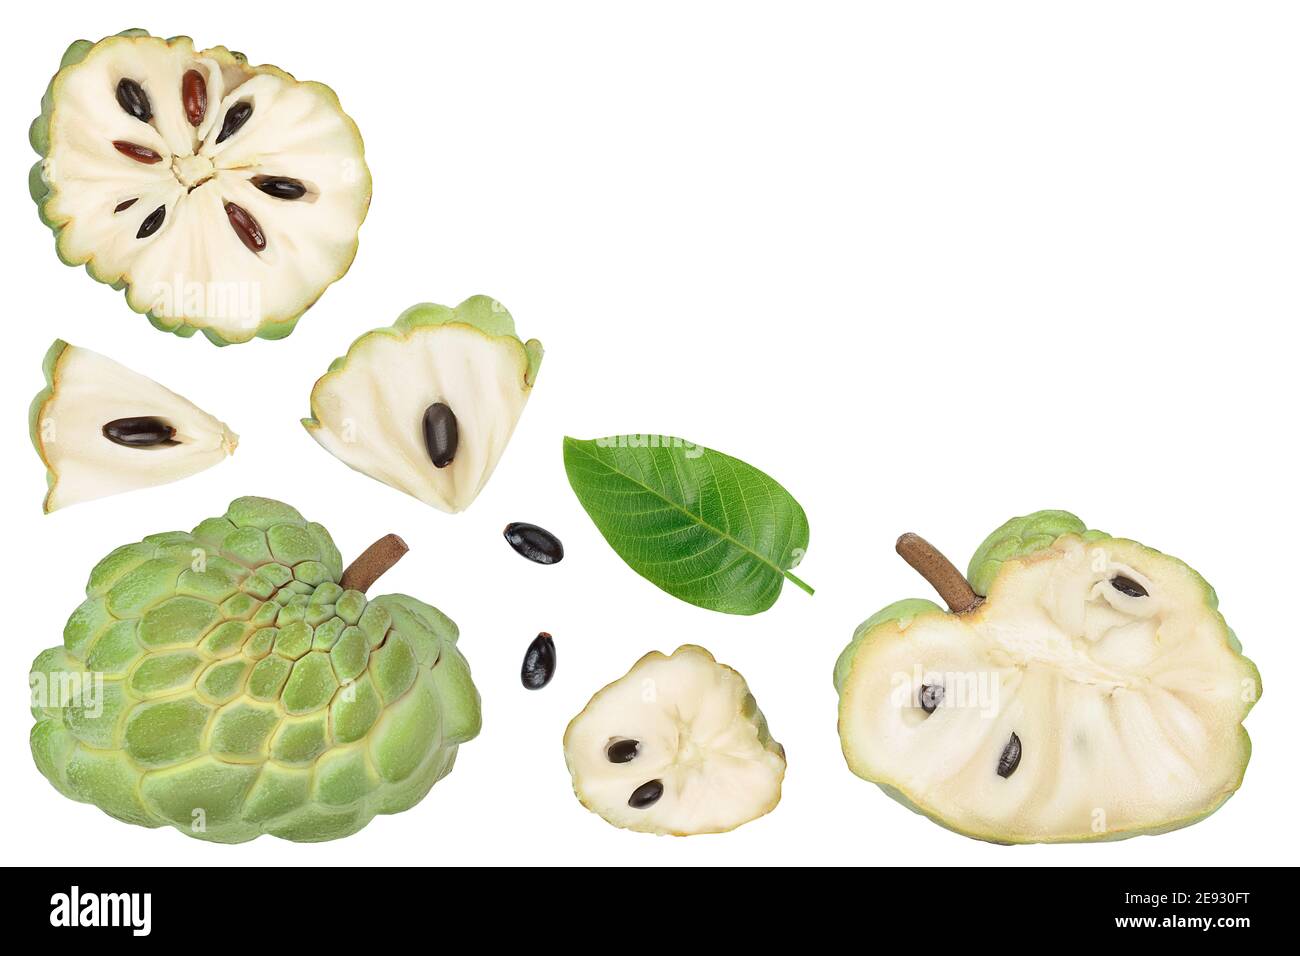 Sugar apple or custard apple isolated on white background. Exotic tropical Thai annona or cherimoya fruit. Top view. Flat lay Stock Photo